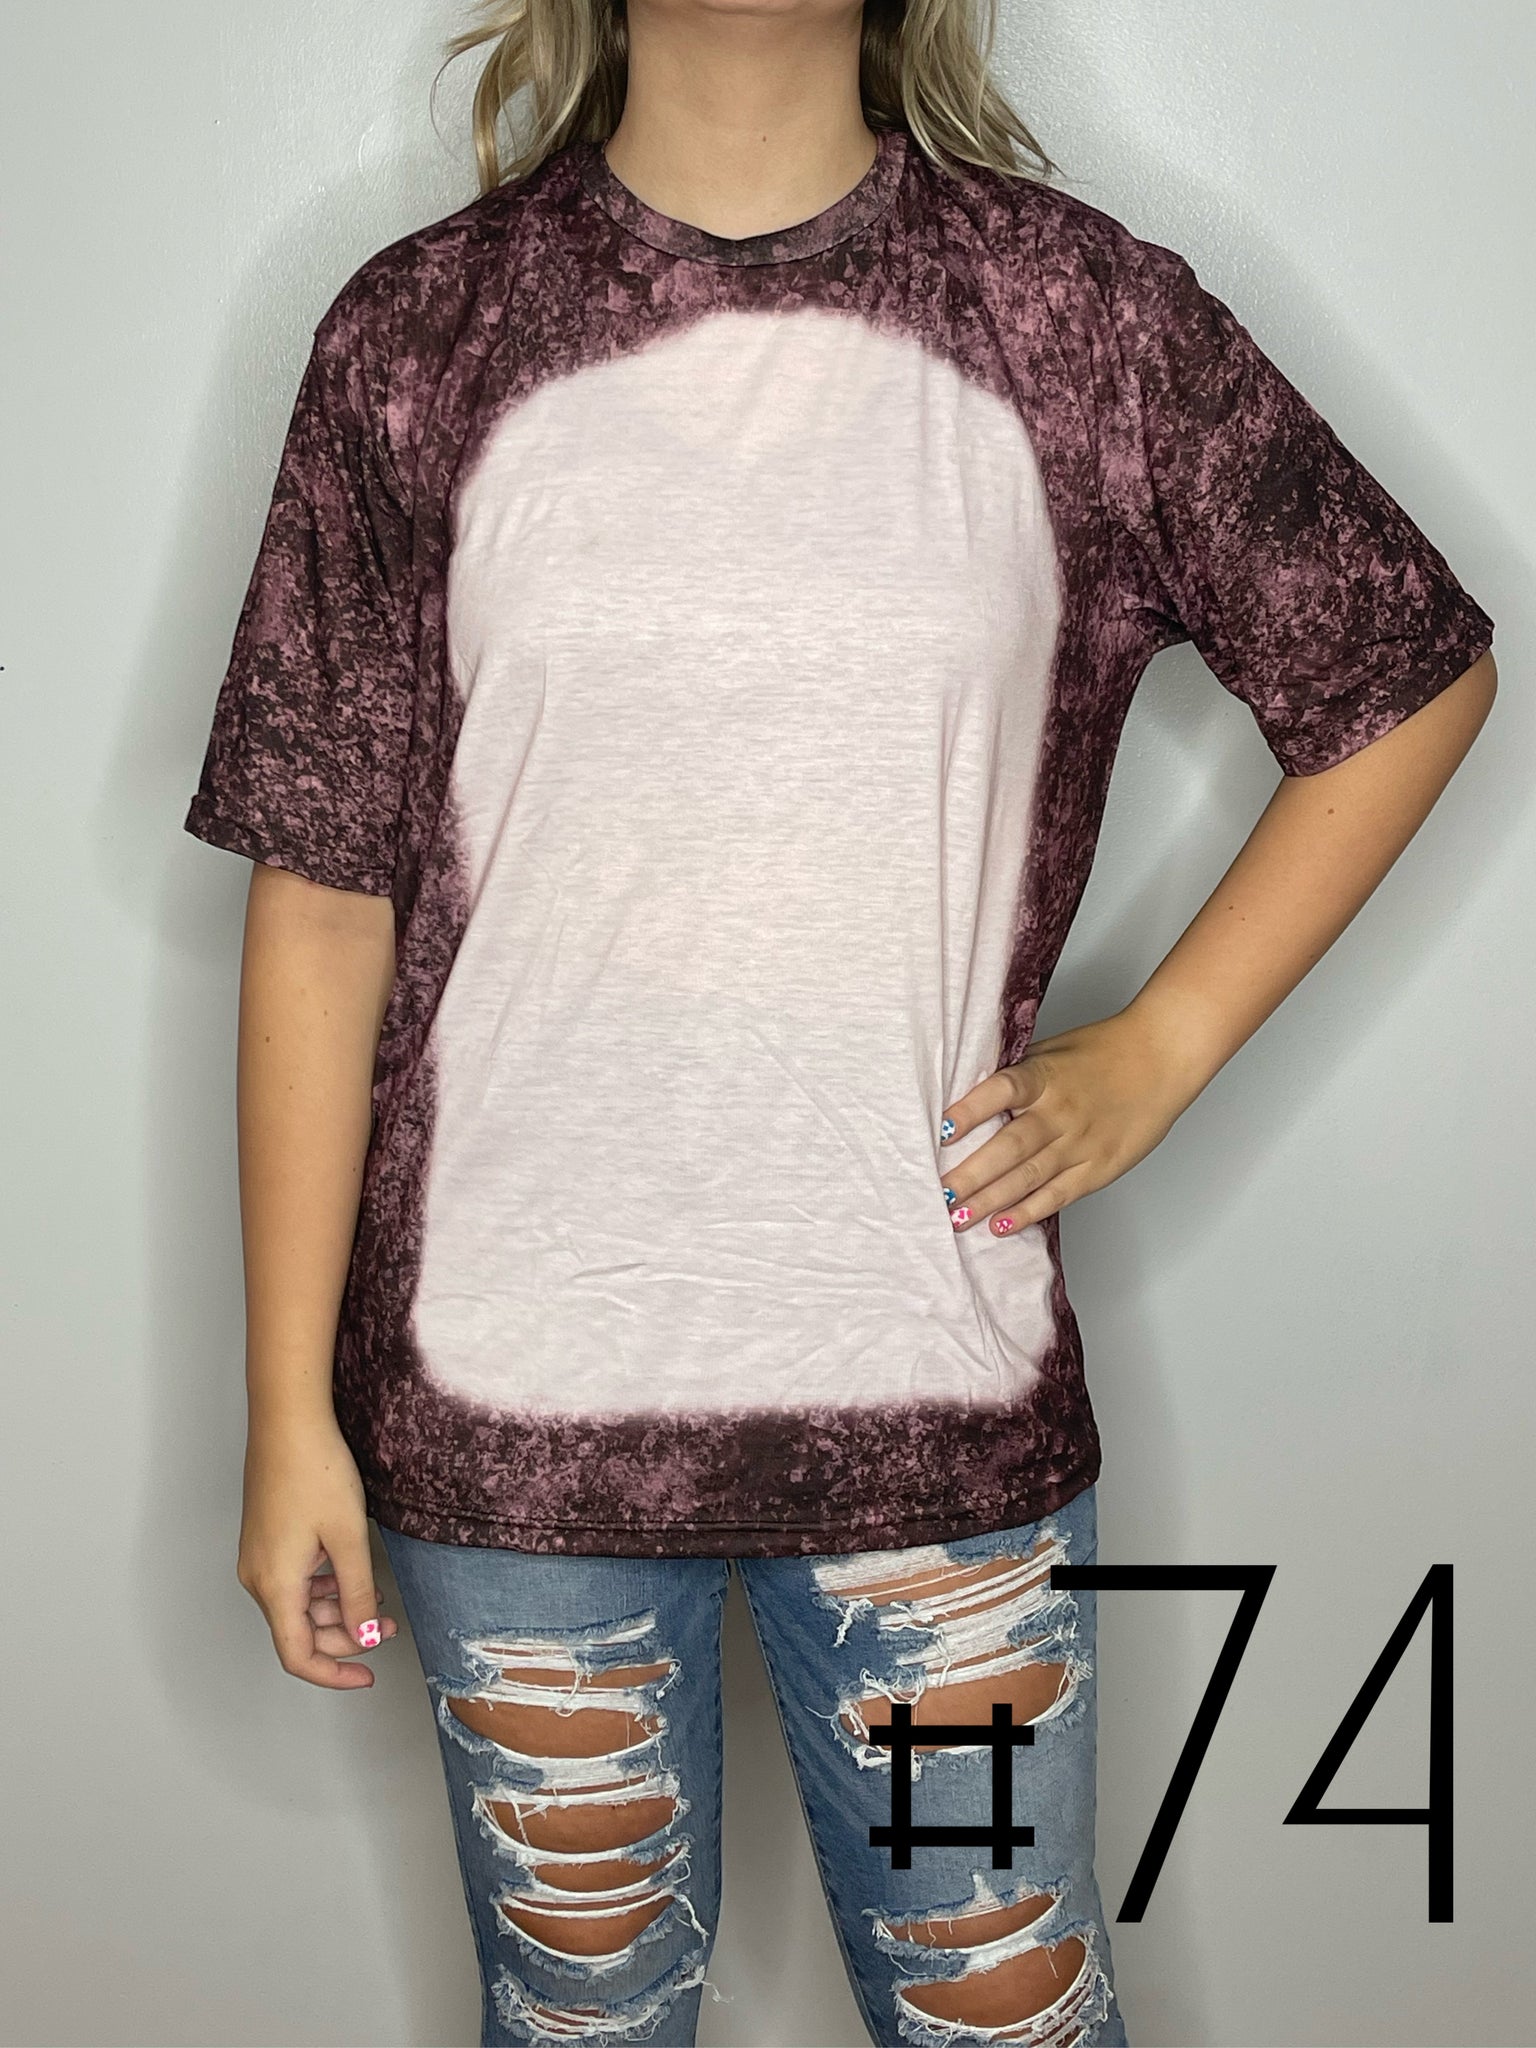 Sublimation Bleached Tee #074